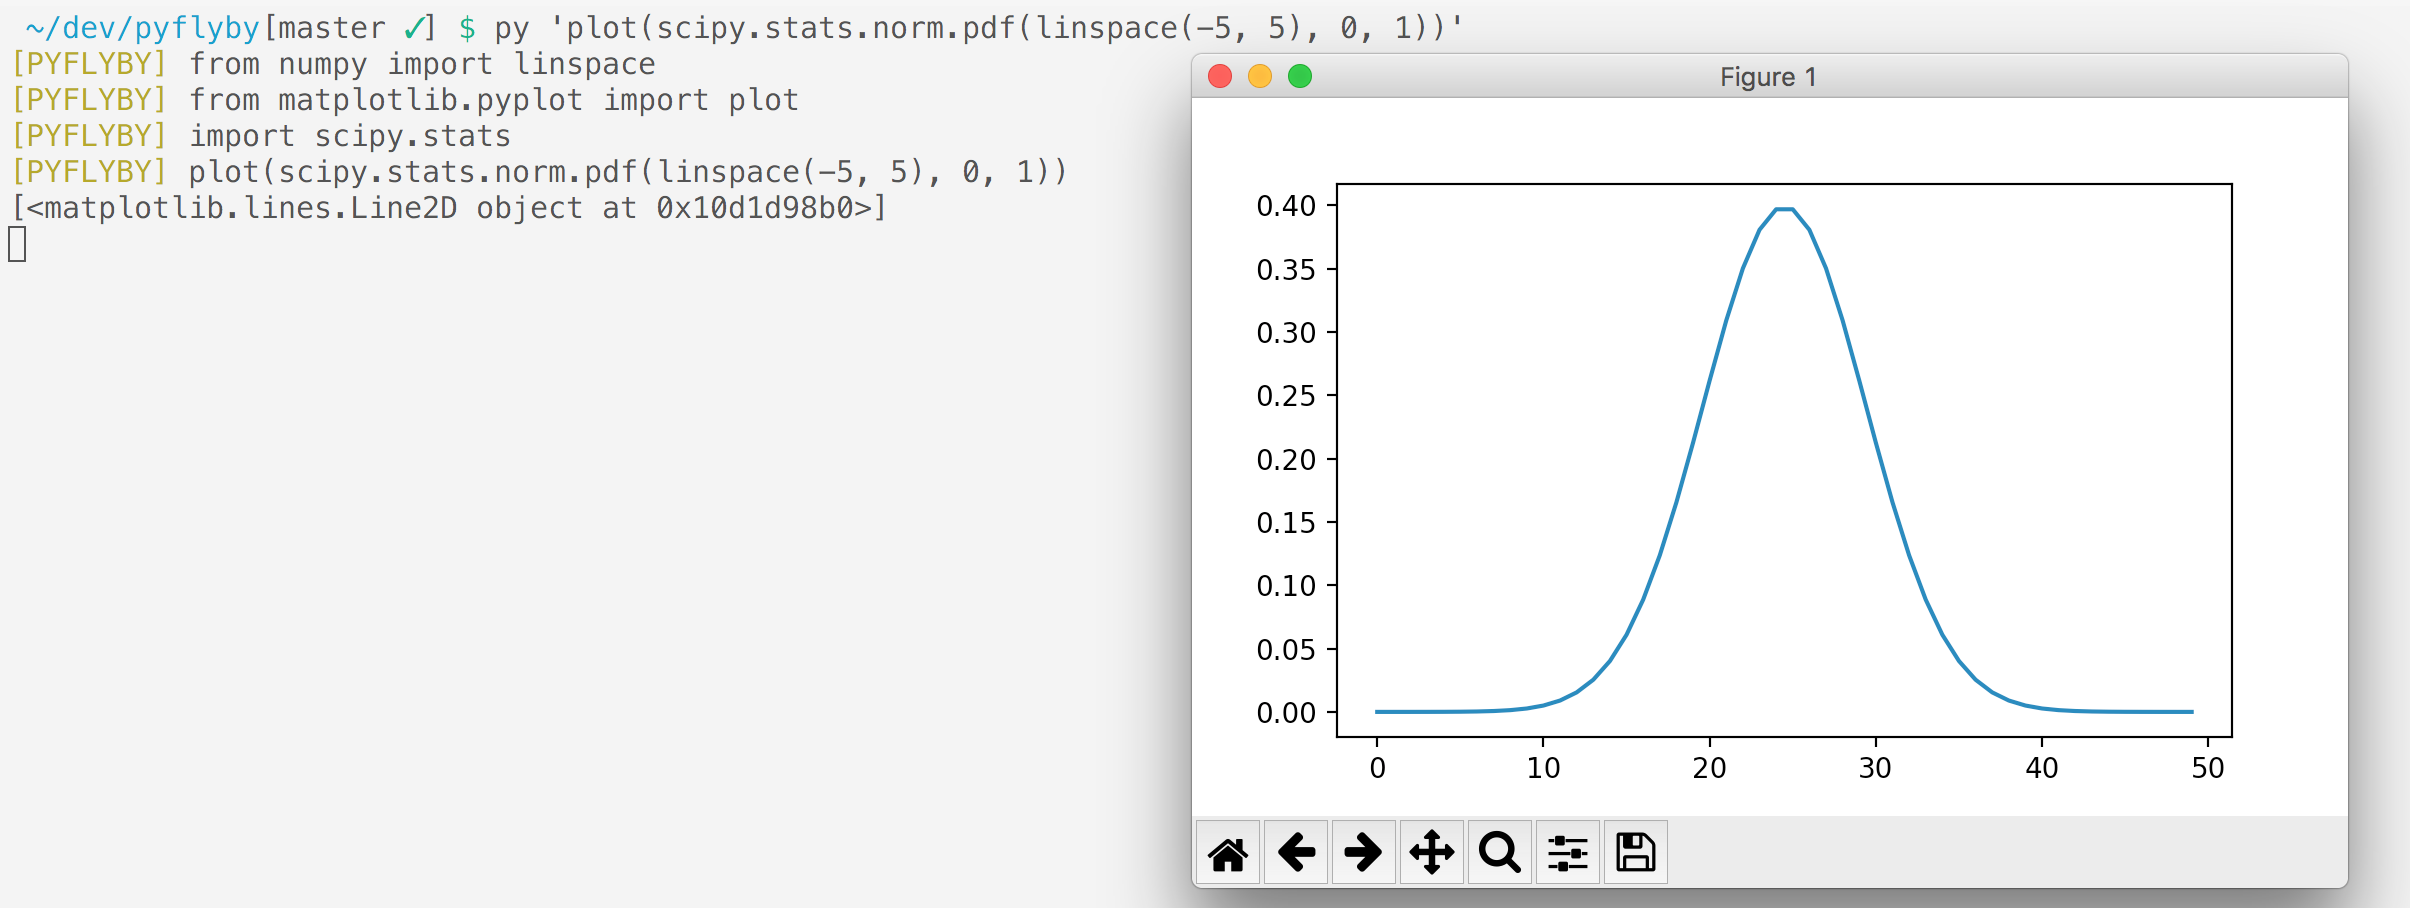 using pyflyby from bash to plot with matplotlib with above snippet, at matplotlib widow is open and show the plot.